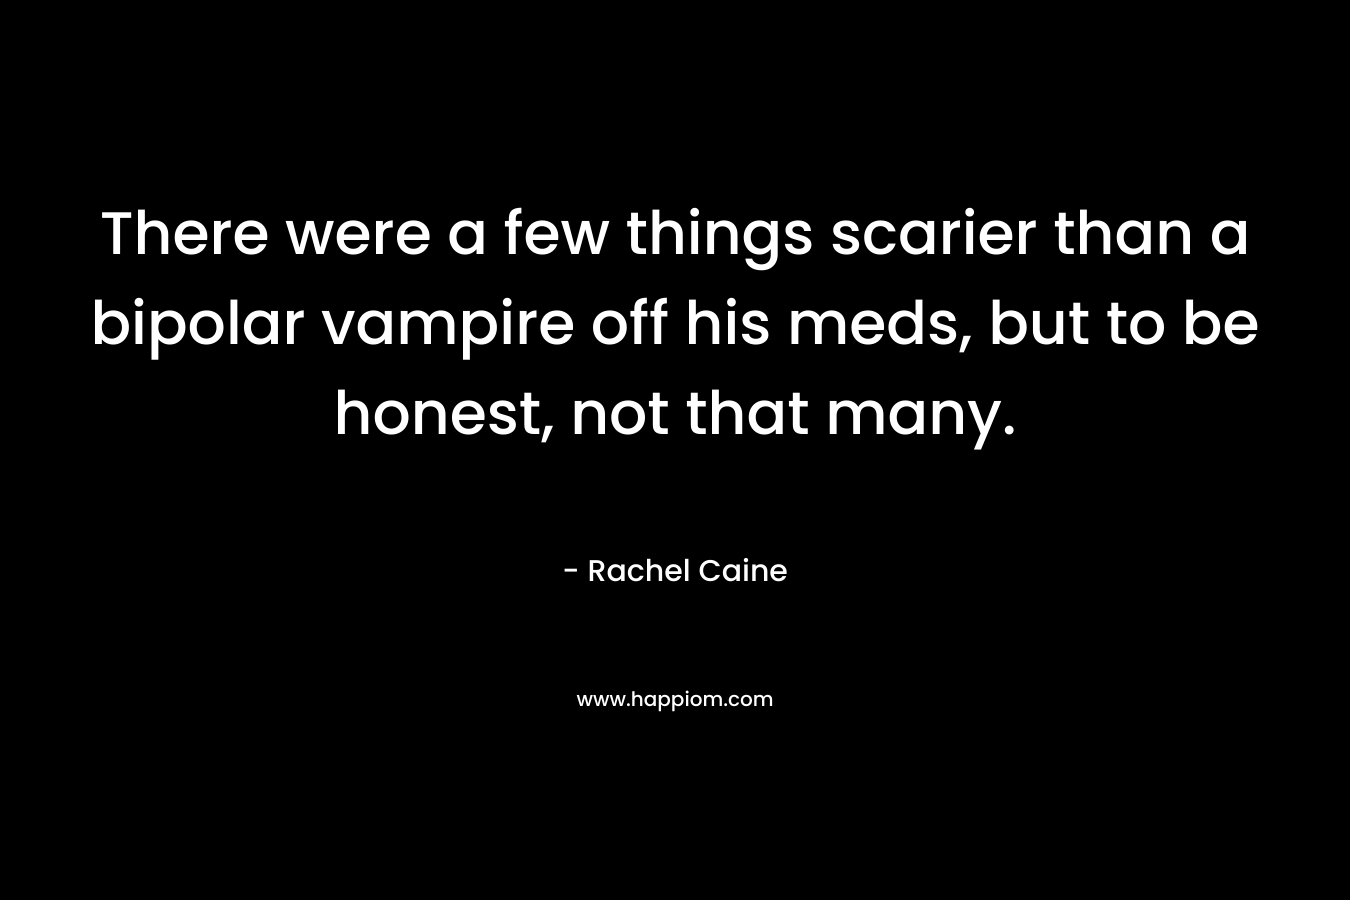 There were a few things scarier than a bipolar vampire off his meds, but to be honest, not that many.